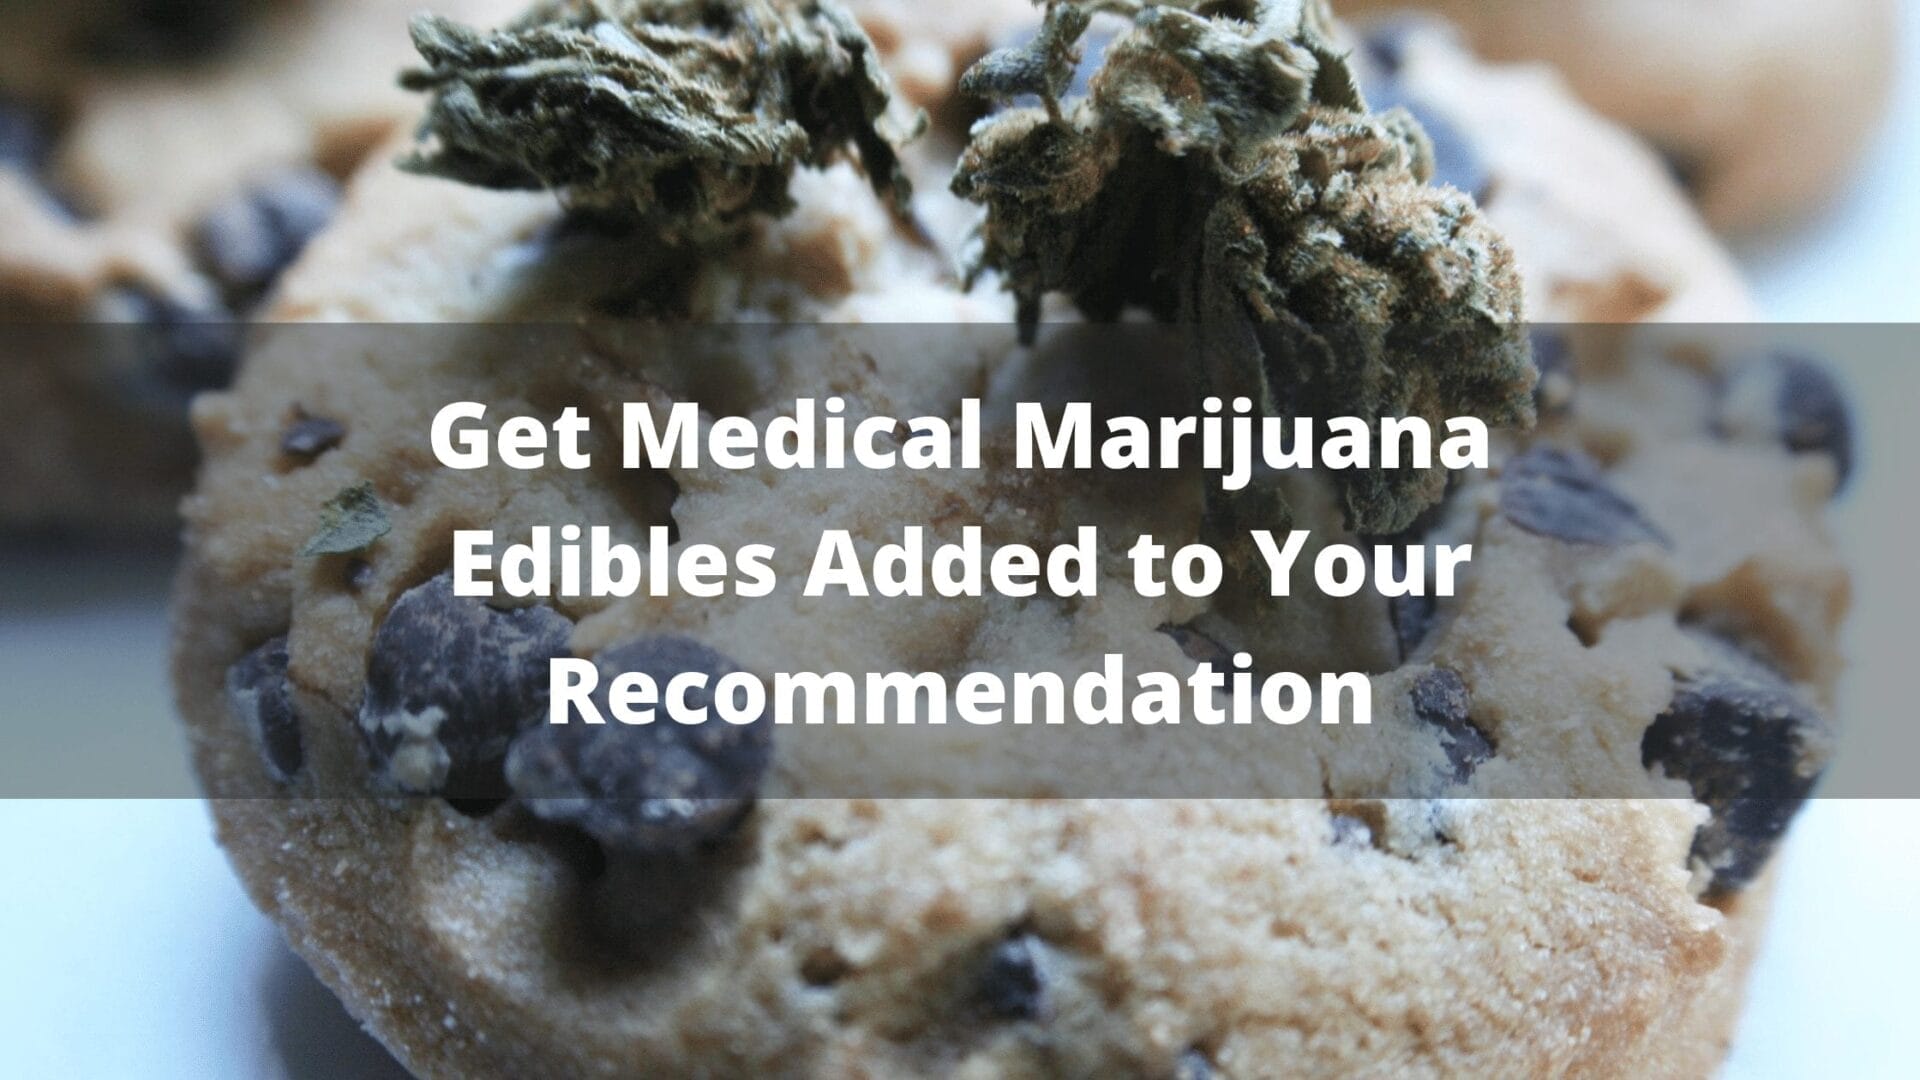 Get Medical Marijuana Edibles Added to Your Recommendation